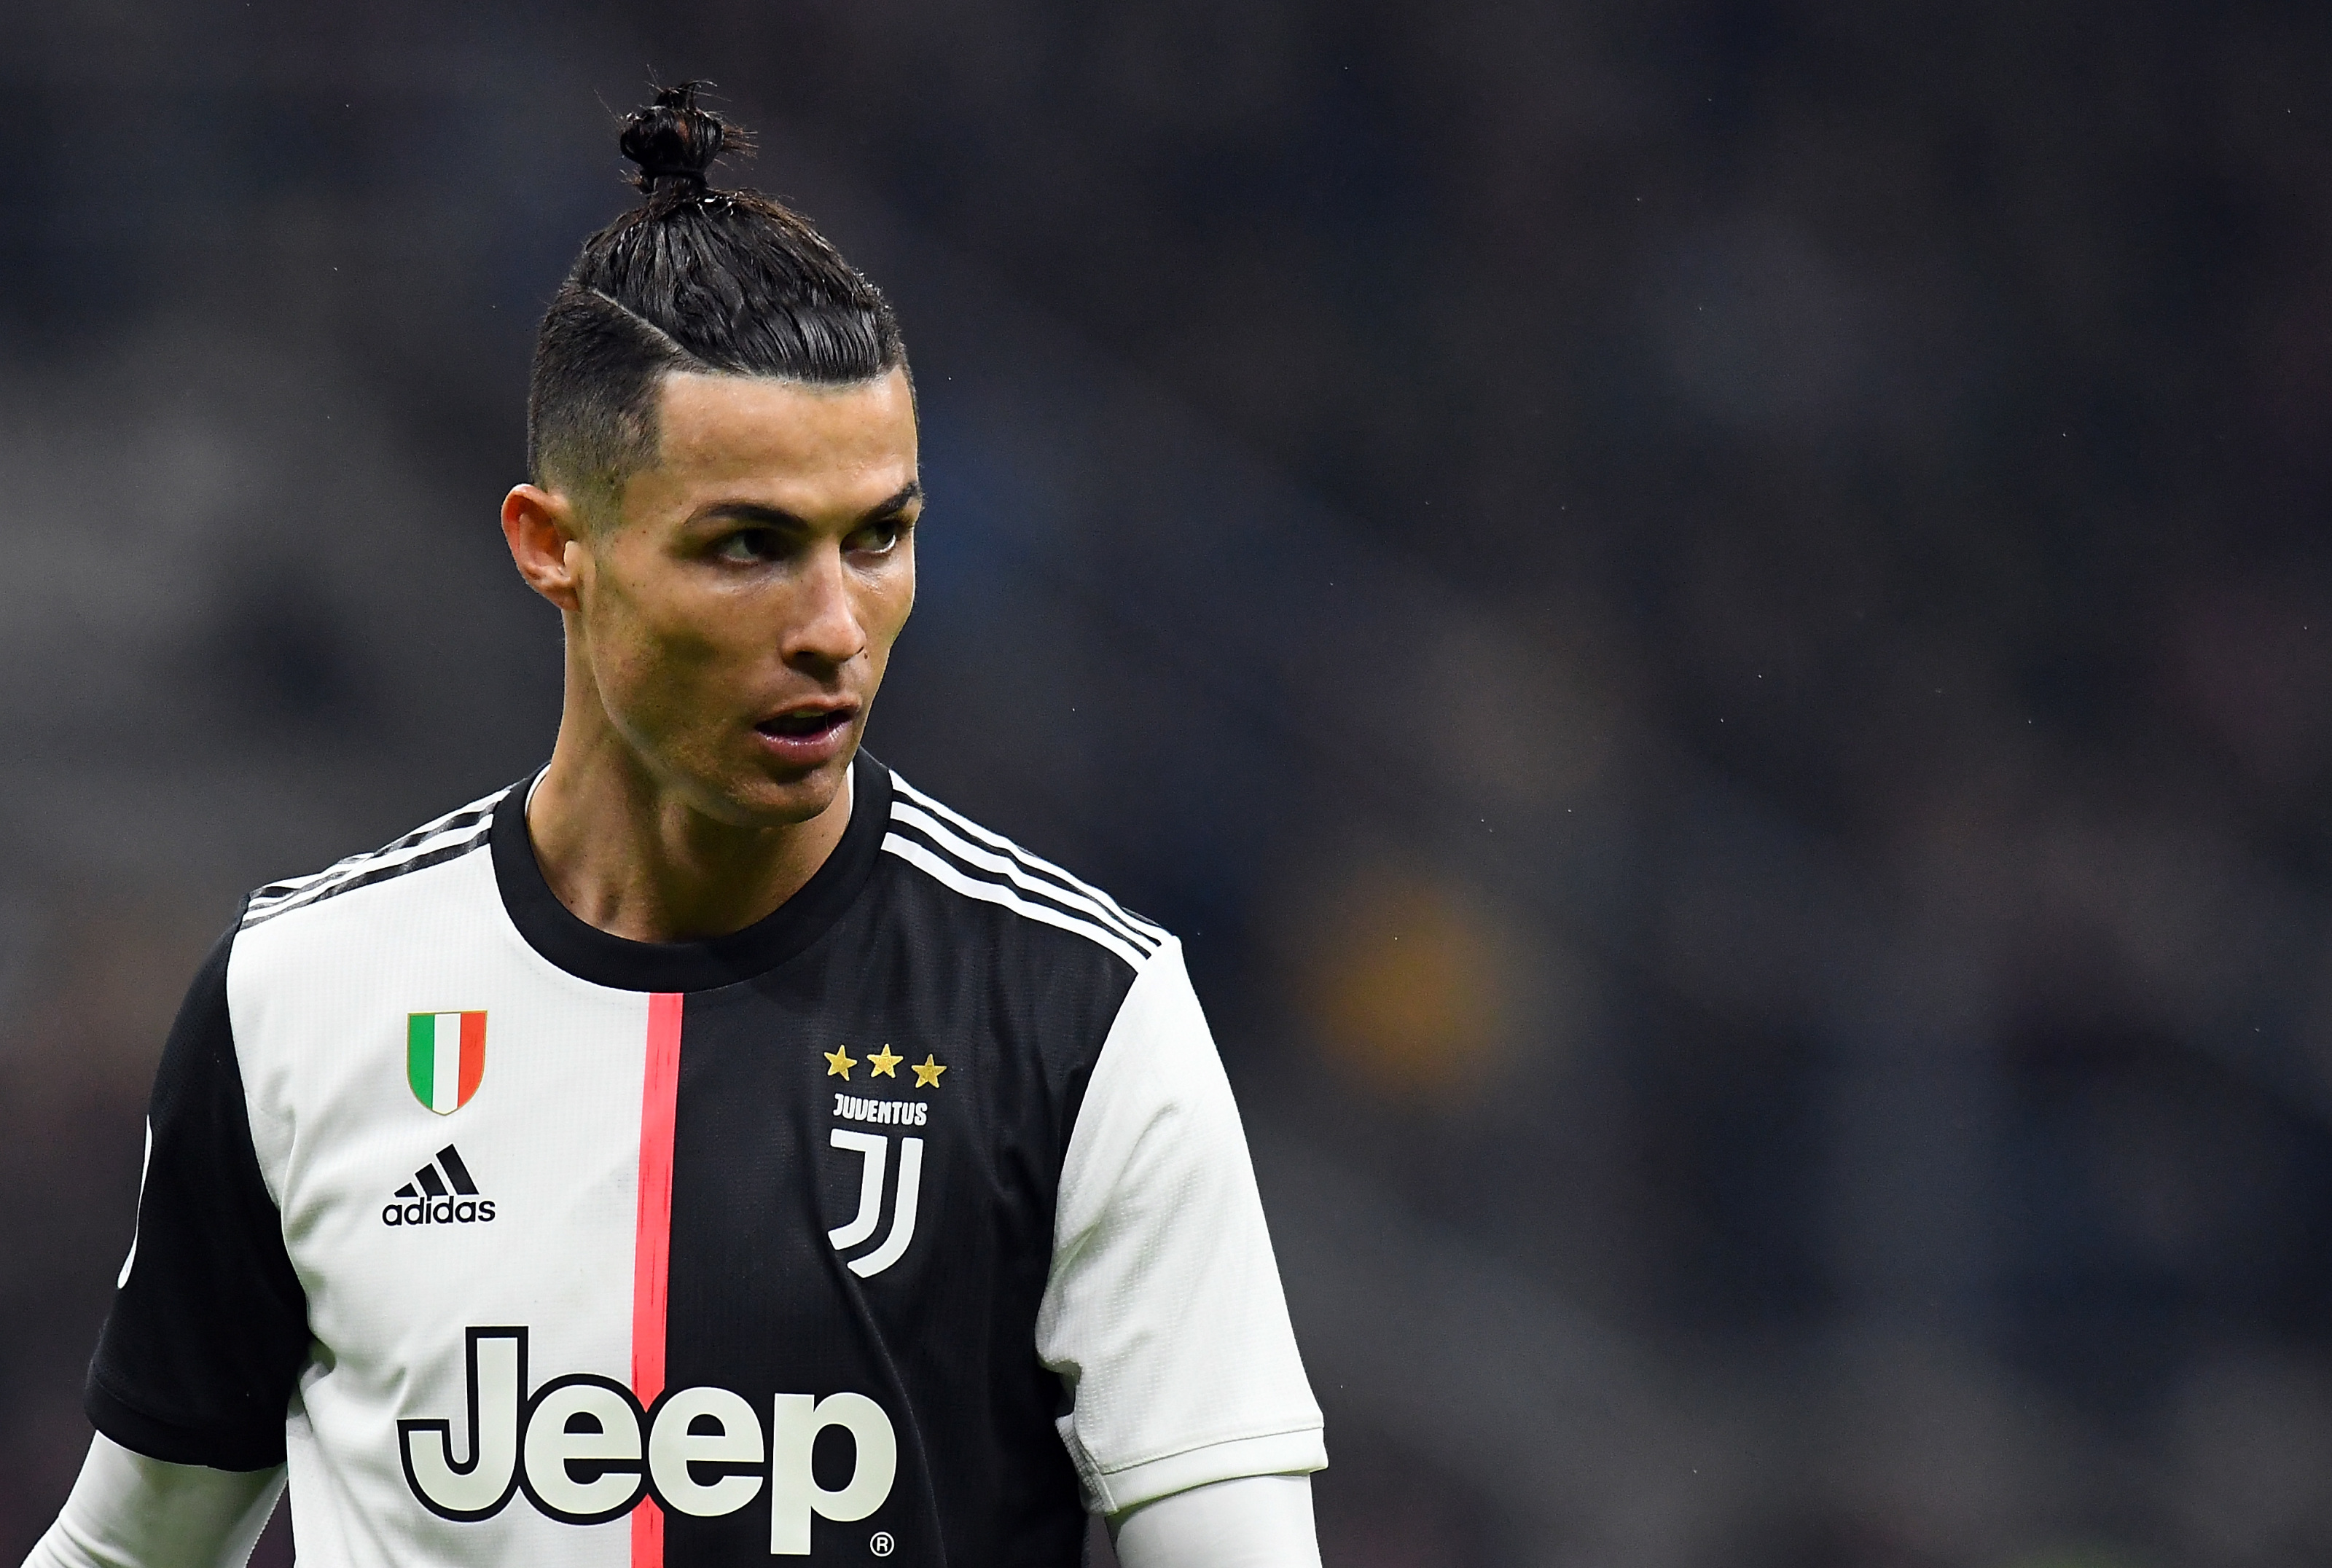 Cristiano Ronaldo Spotted with a Ponytail at Juventus Training Session  Fans Compare it to Gareth Bale   LatestLY